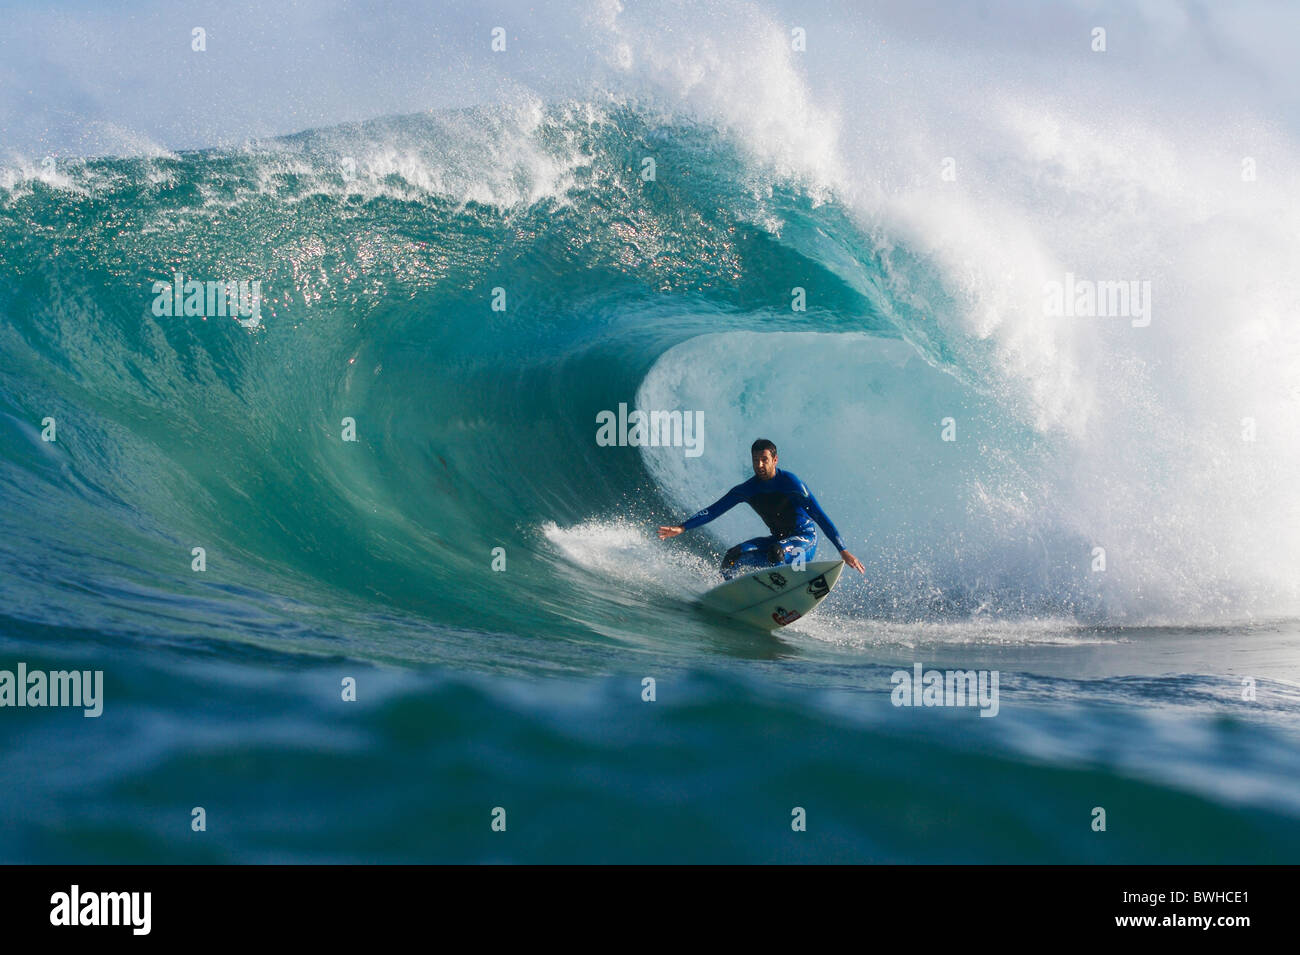 Surfer in the tube of large wave Stock Photo